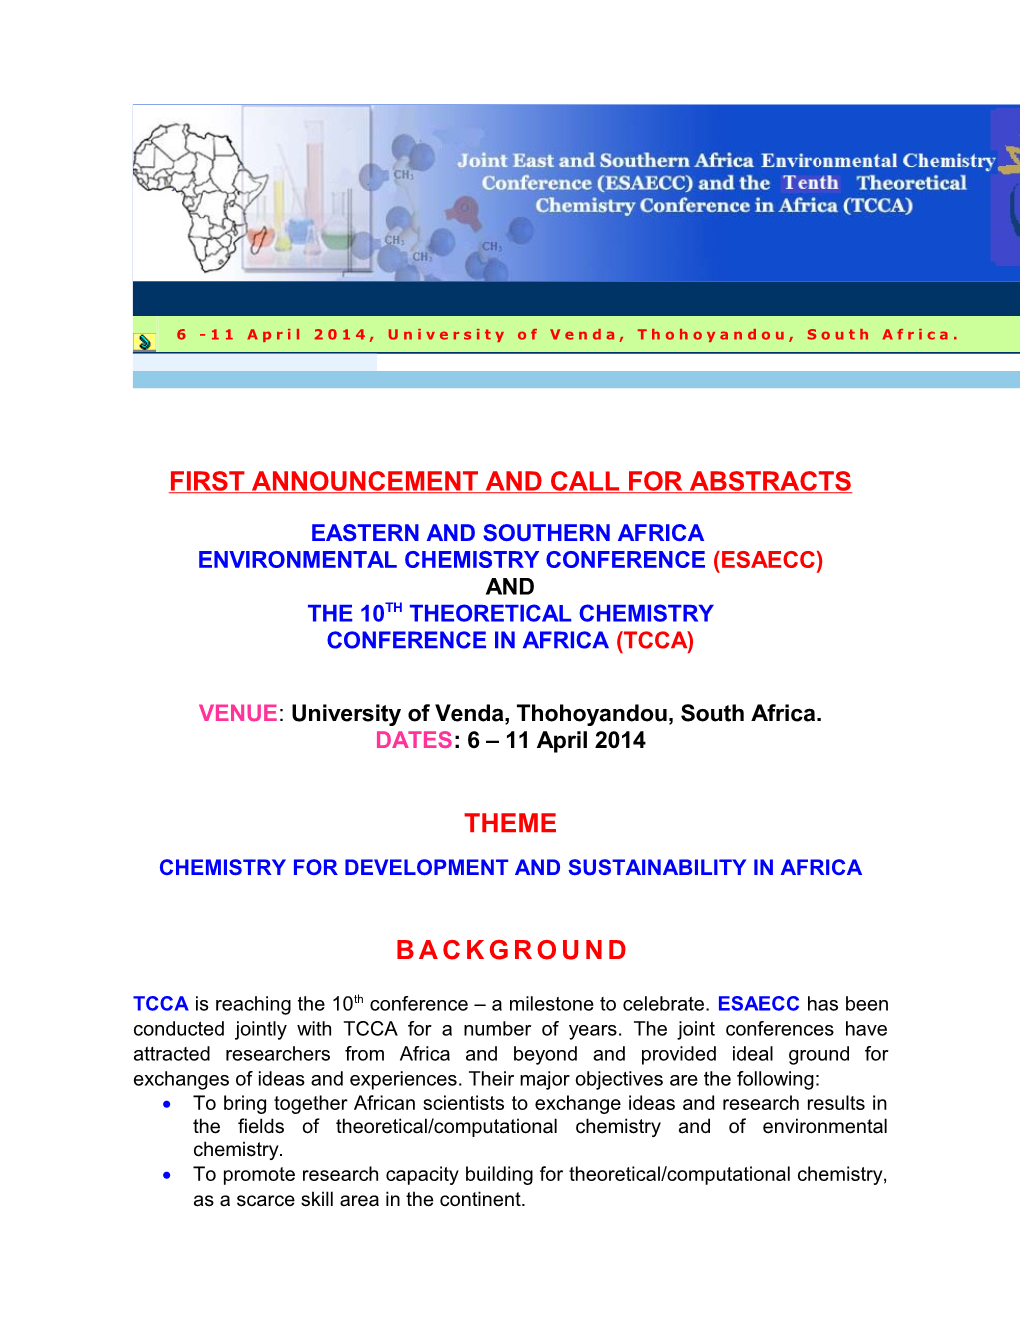 First Announcement and Call for Abstracts